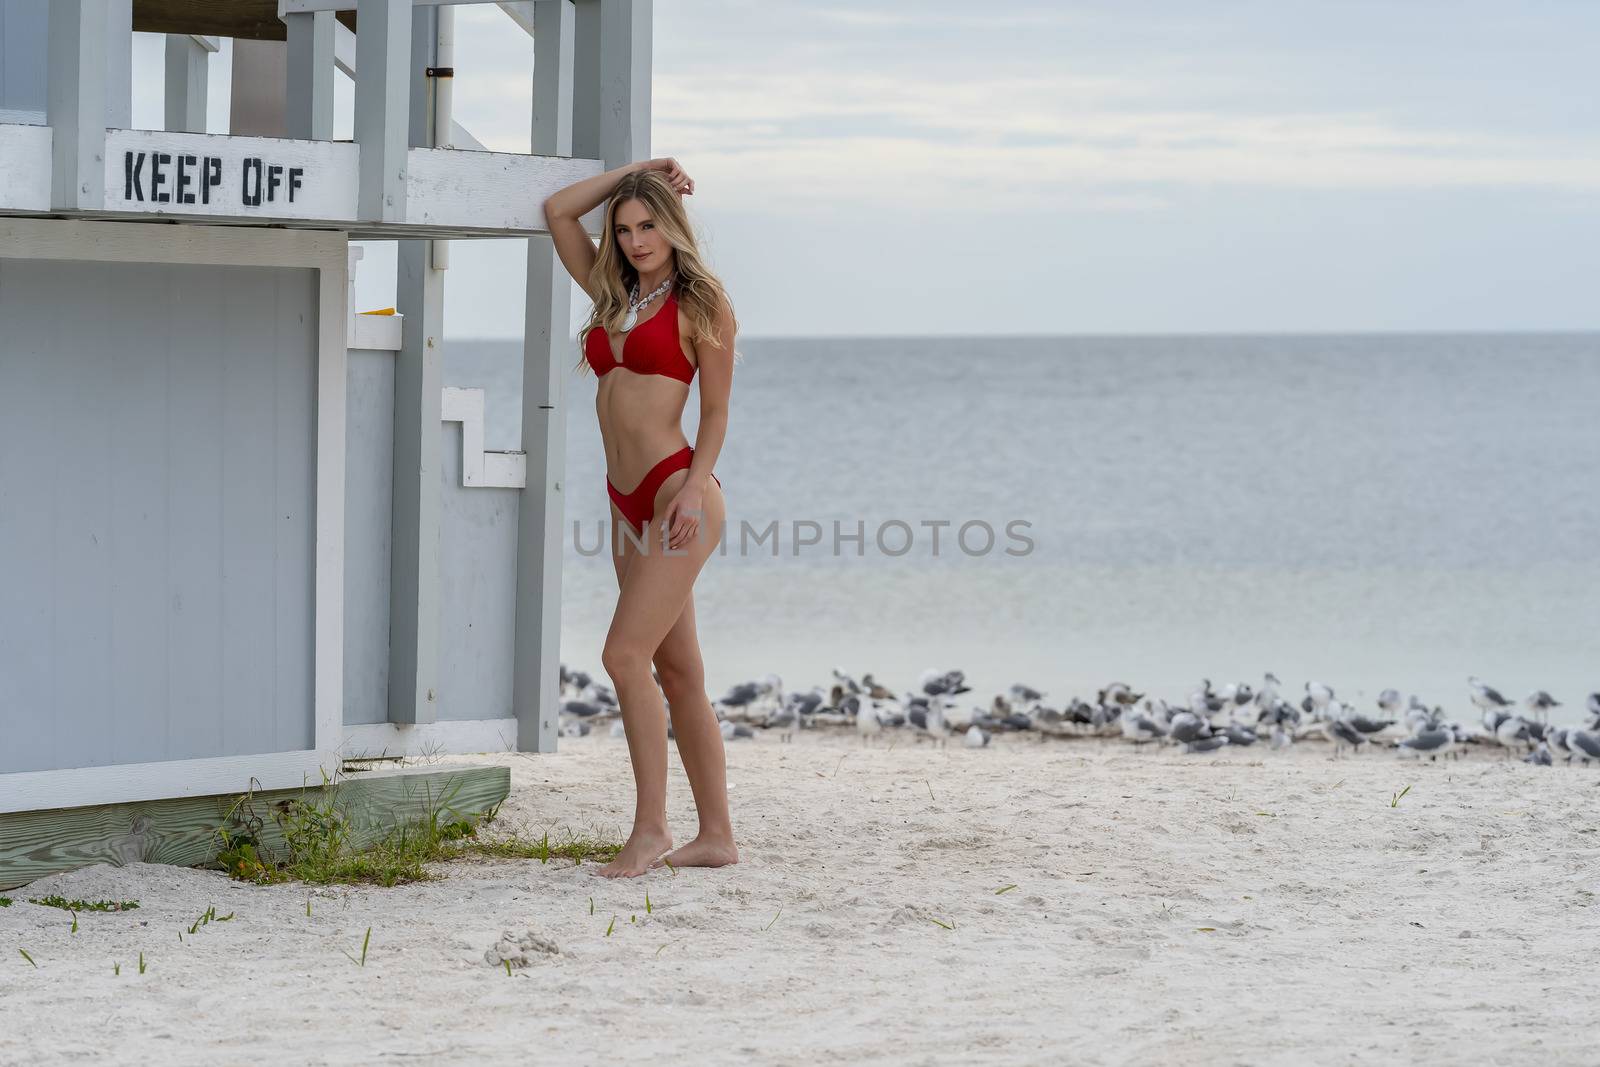 Lovely Blonde Bikini Model Posing Outdoors On A Caribbean Beach Near A Lifeguard Station by actionsports